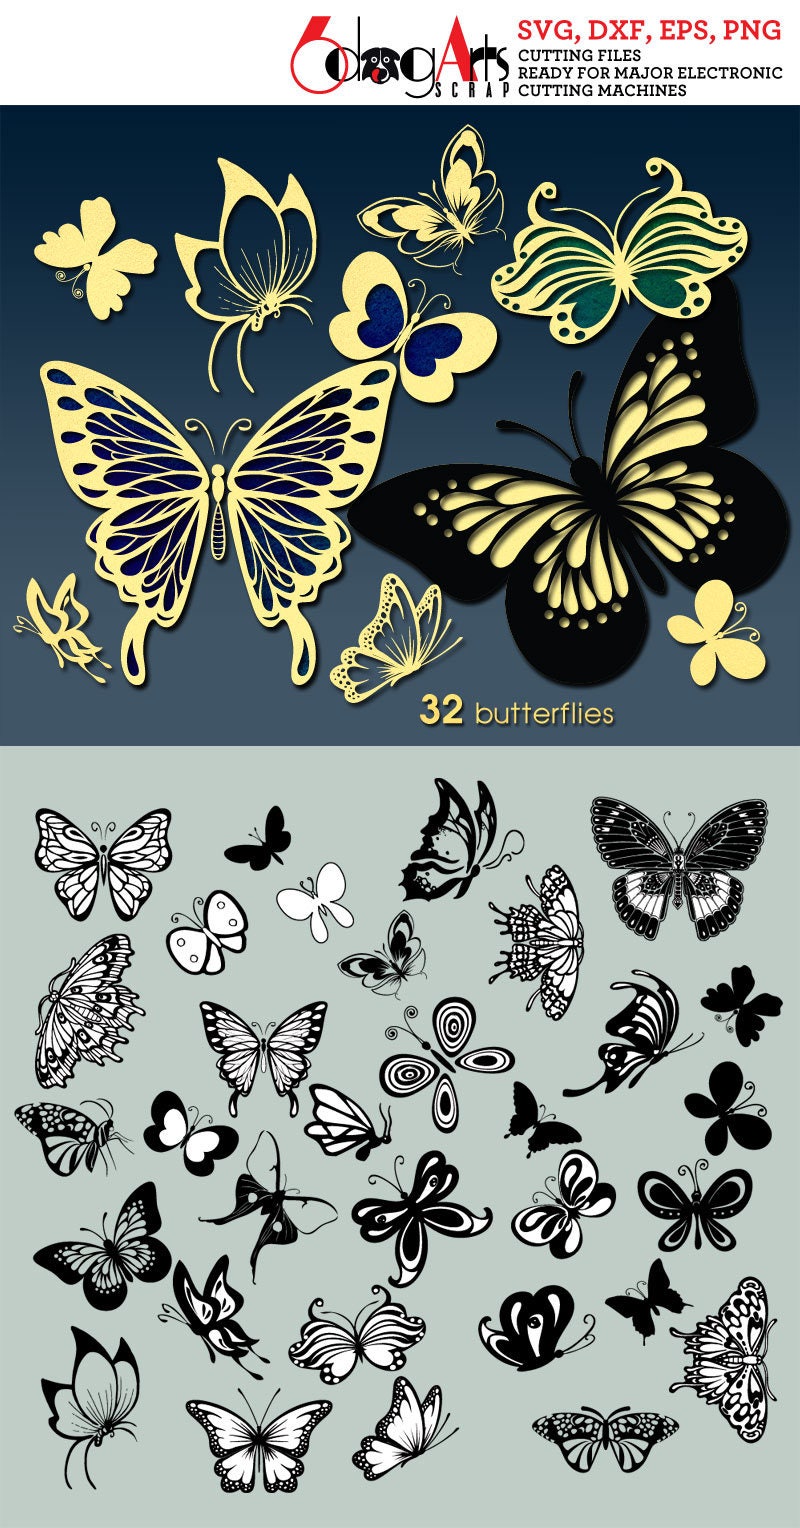 Download 32 Butterflies Vector Digital Cut Files Svg Dxf Eps Png | Etsy